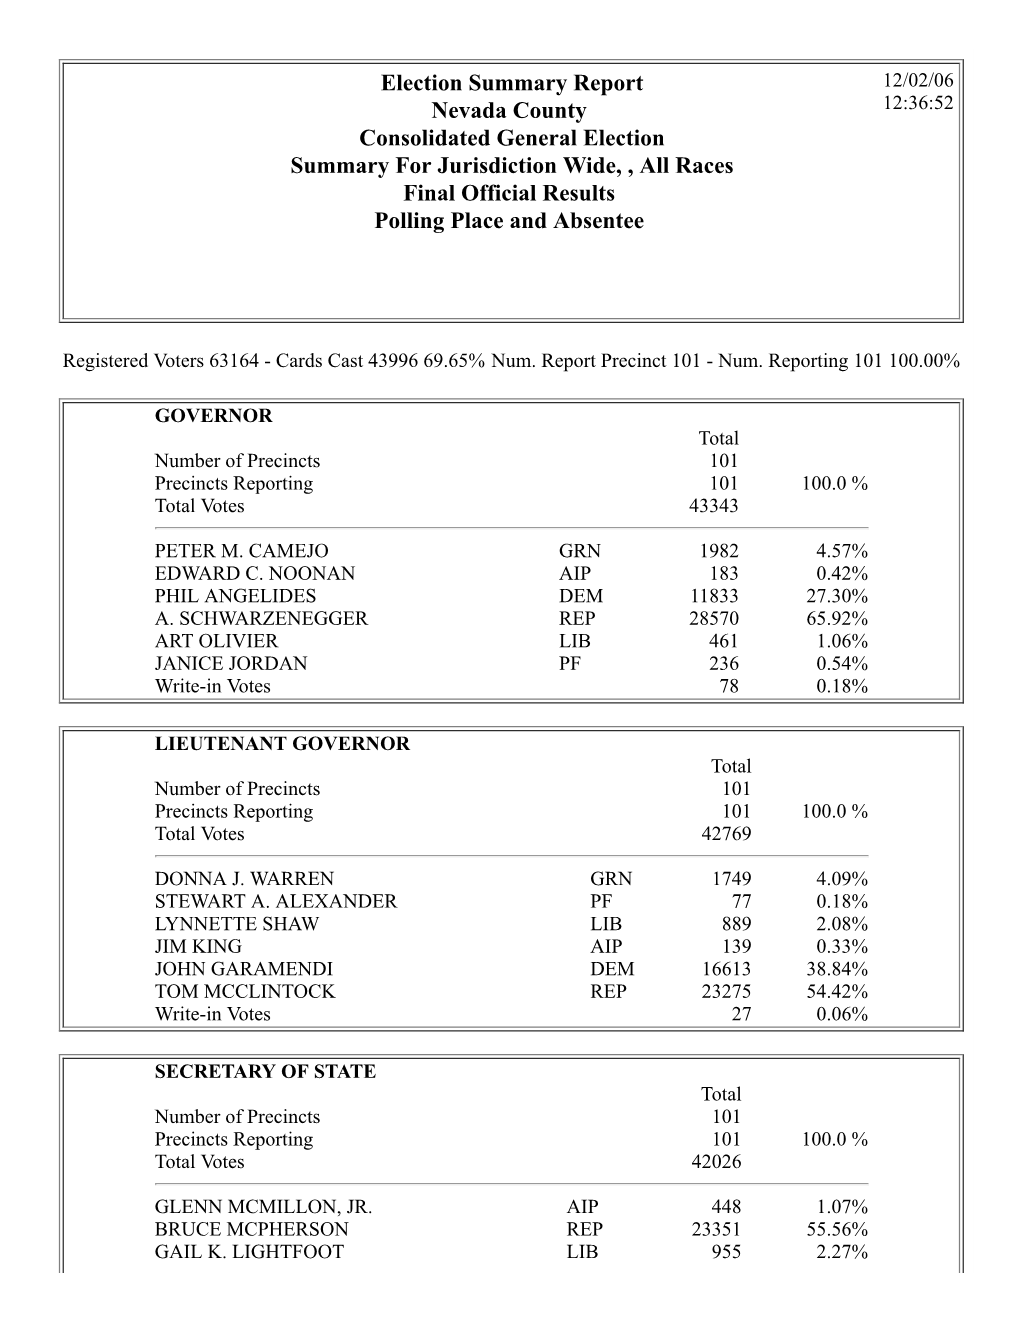 November 2006 Official Summary Results (PDF)